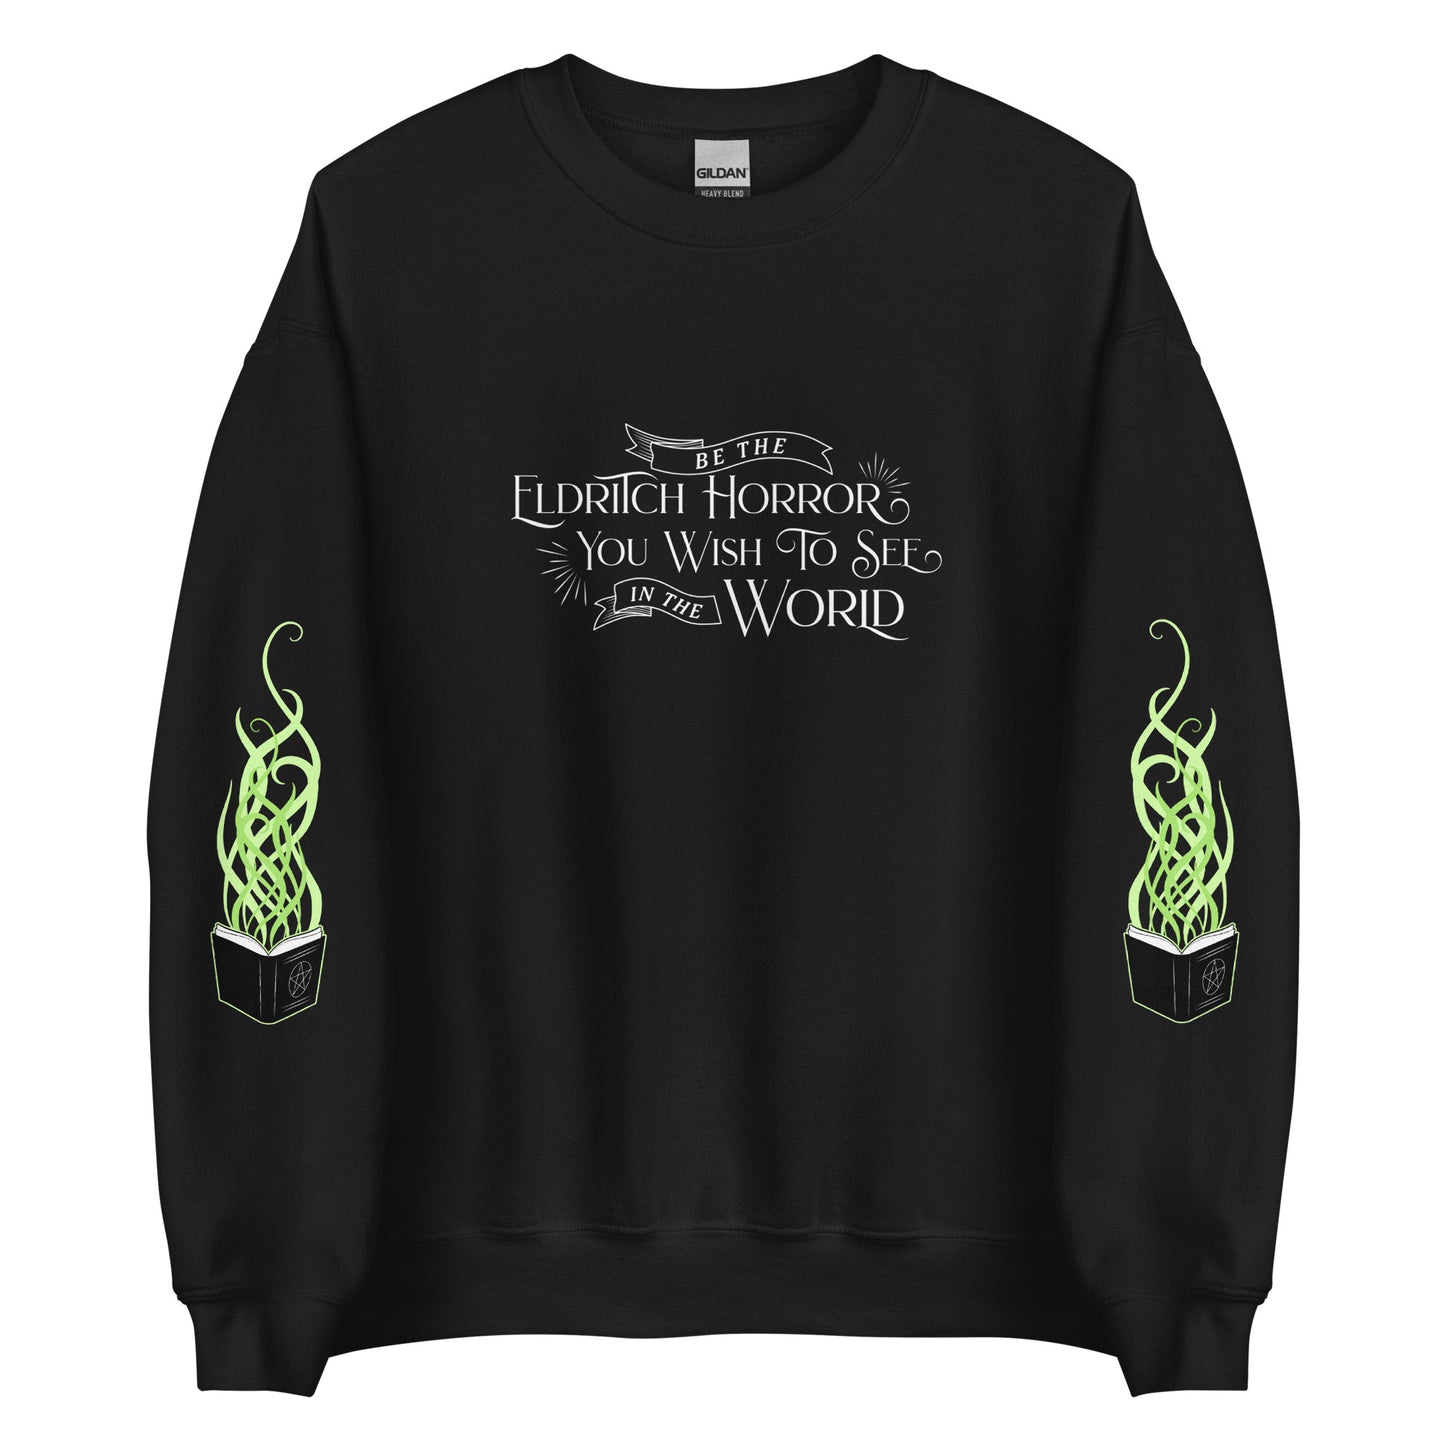 A black crewneck sweatshirt with white old-fashioned text on the chest that reads "Be The Eldritch Horror You Wish To See In The World". On each sleeve is an illustration of a spellbook with green magical tendrils spreading upward from the pages.